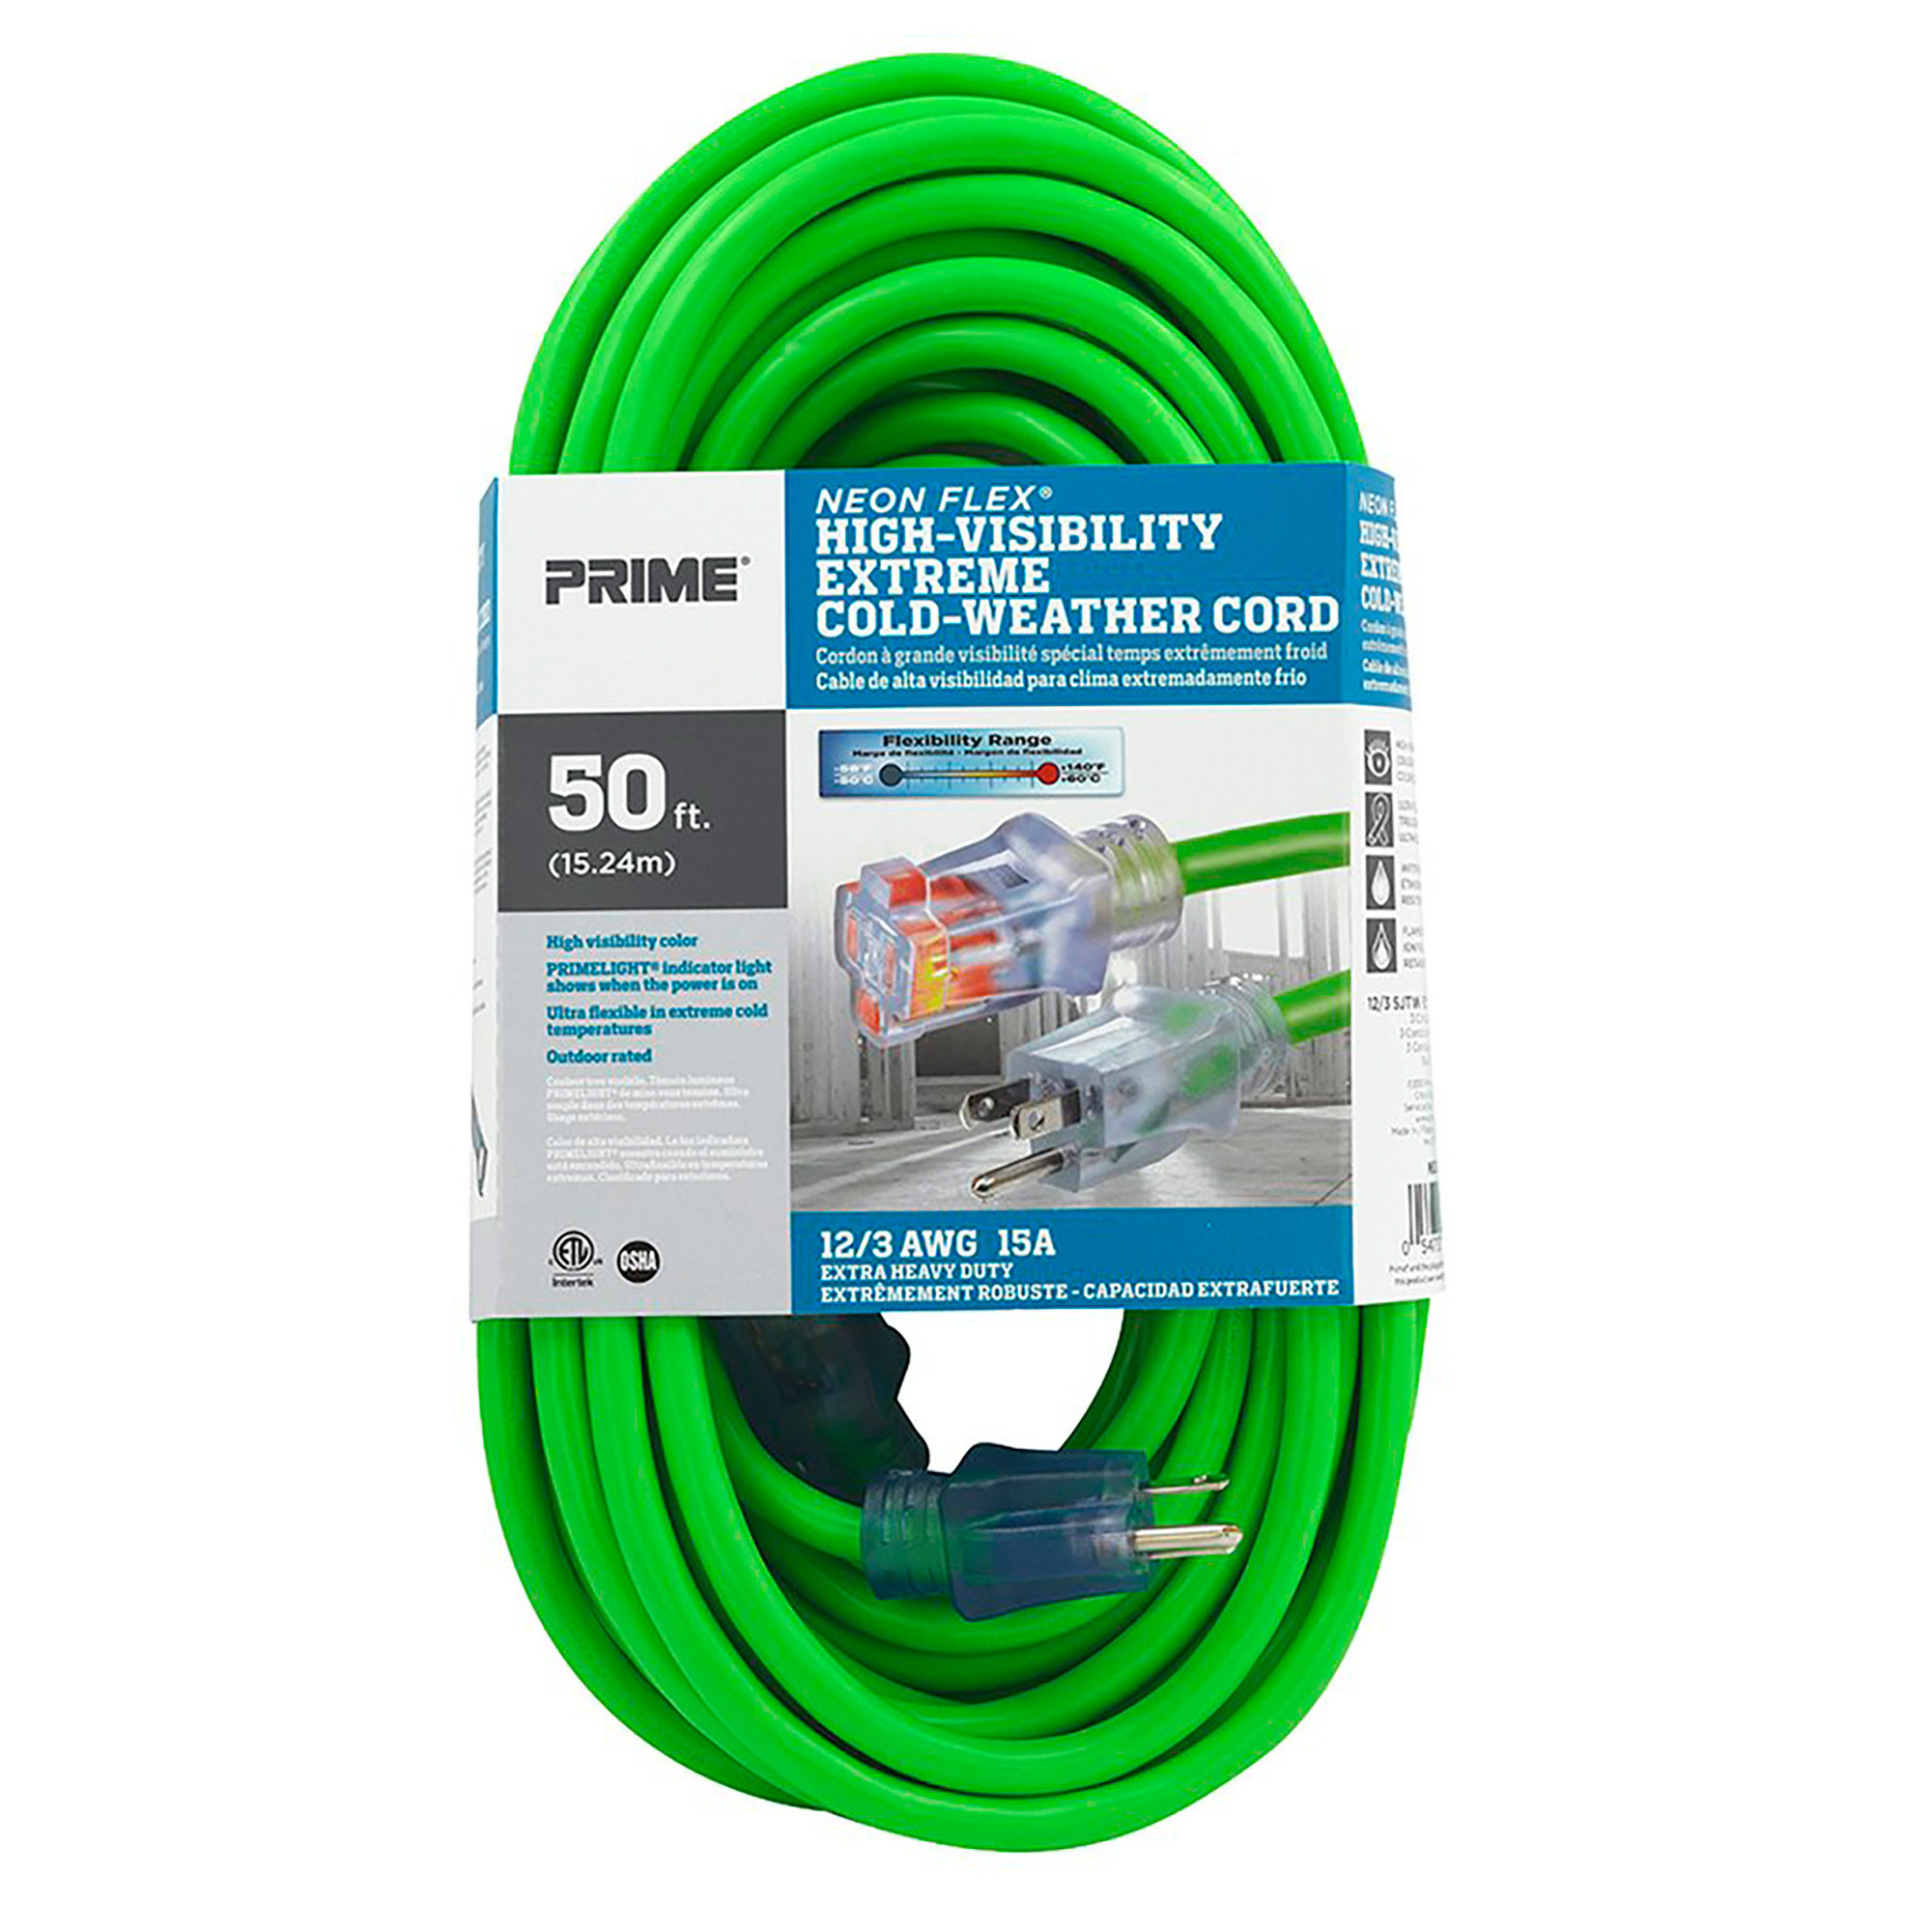 Prime Wire & Cable Heavy-Duty Outdoor Neon Extension Cord, 50Ft., 12/3 Gauge, 15 Amps, Green, Model NS512830